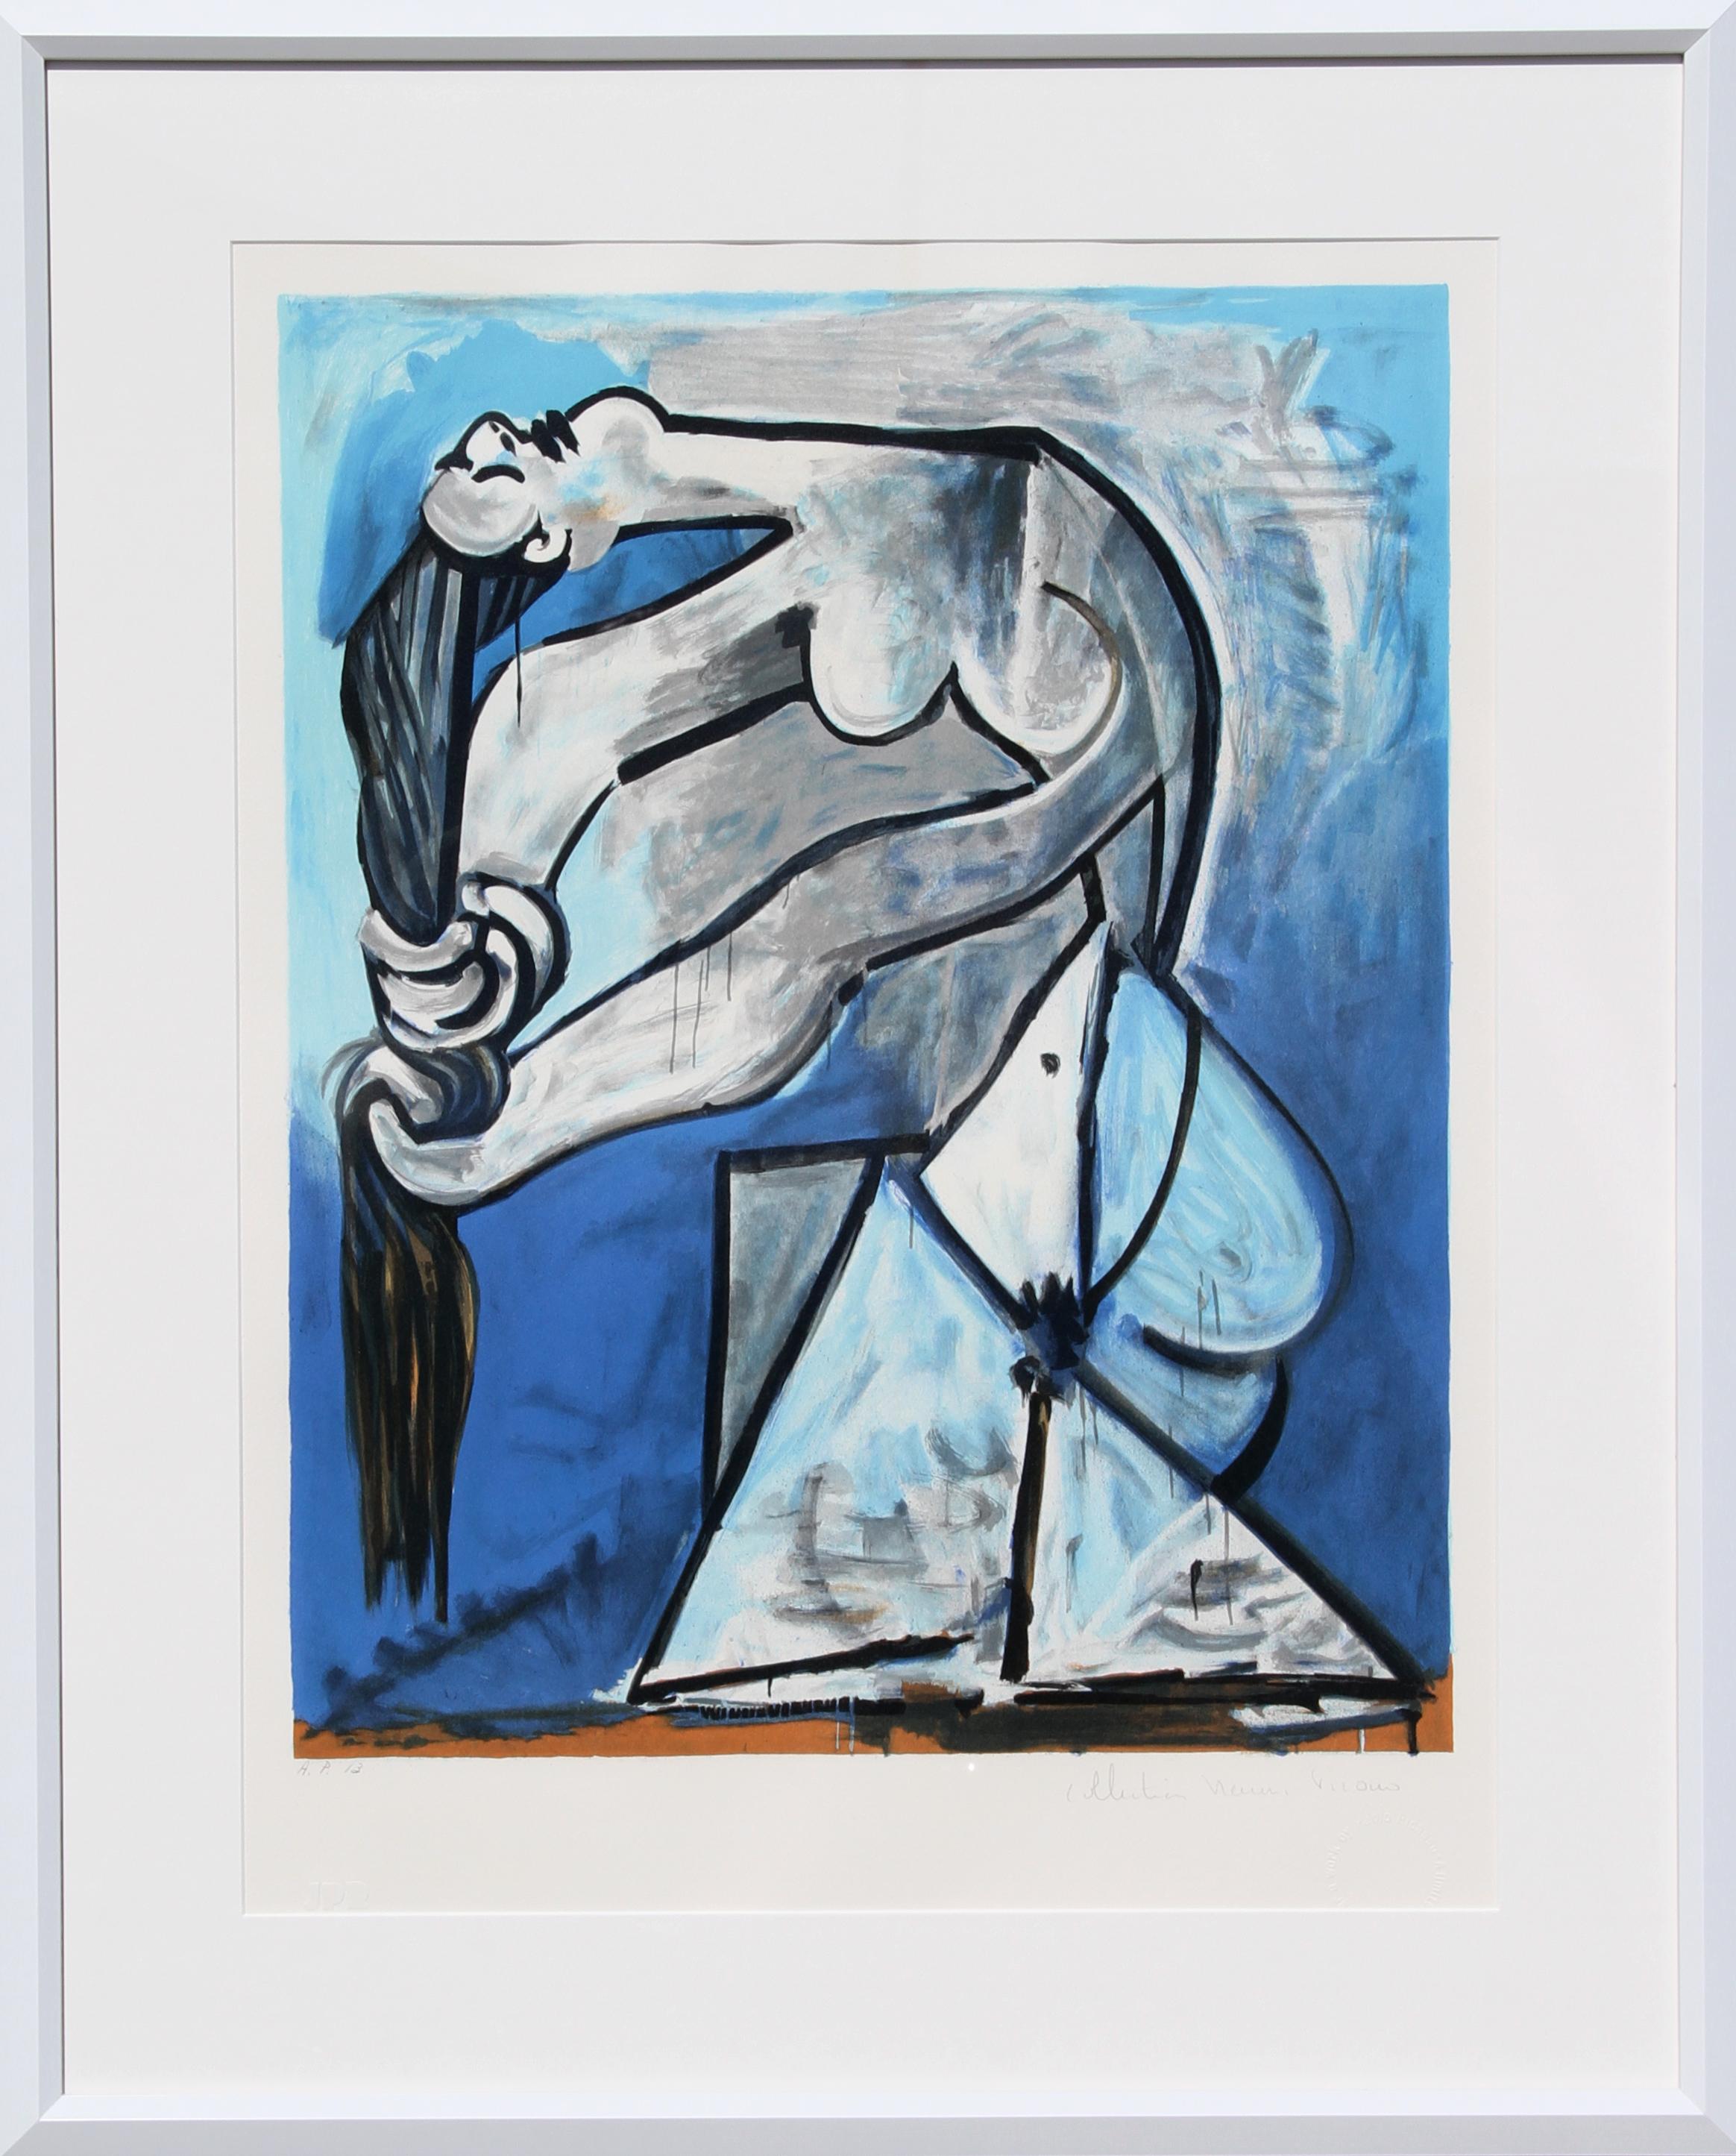 A lithograph reproduction from the Marina Picasso Estate Collection after the Pablo Picasso painting "Nu se tordant les cheveux".  The original painting was completed in 1952. In the 1970's after Picasso's death, Marina Picasso, his granddaughter,